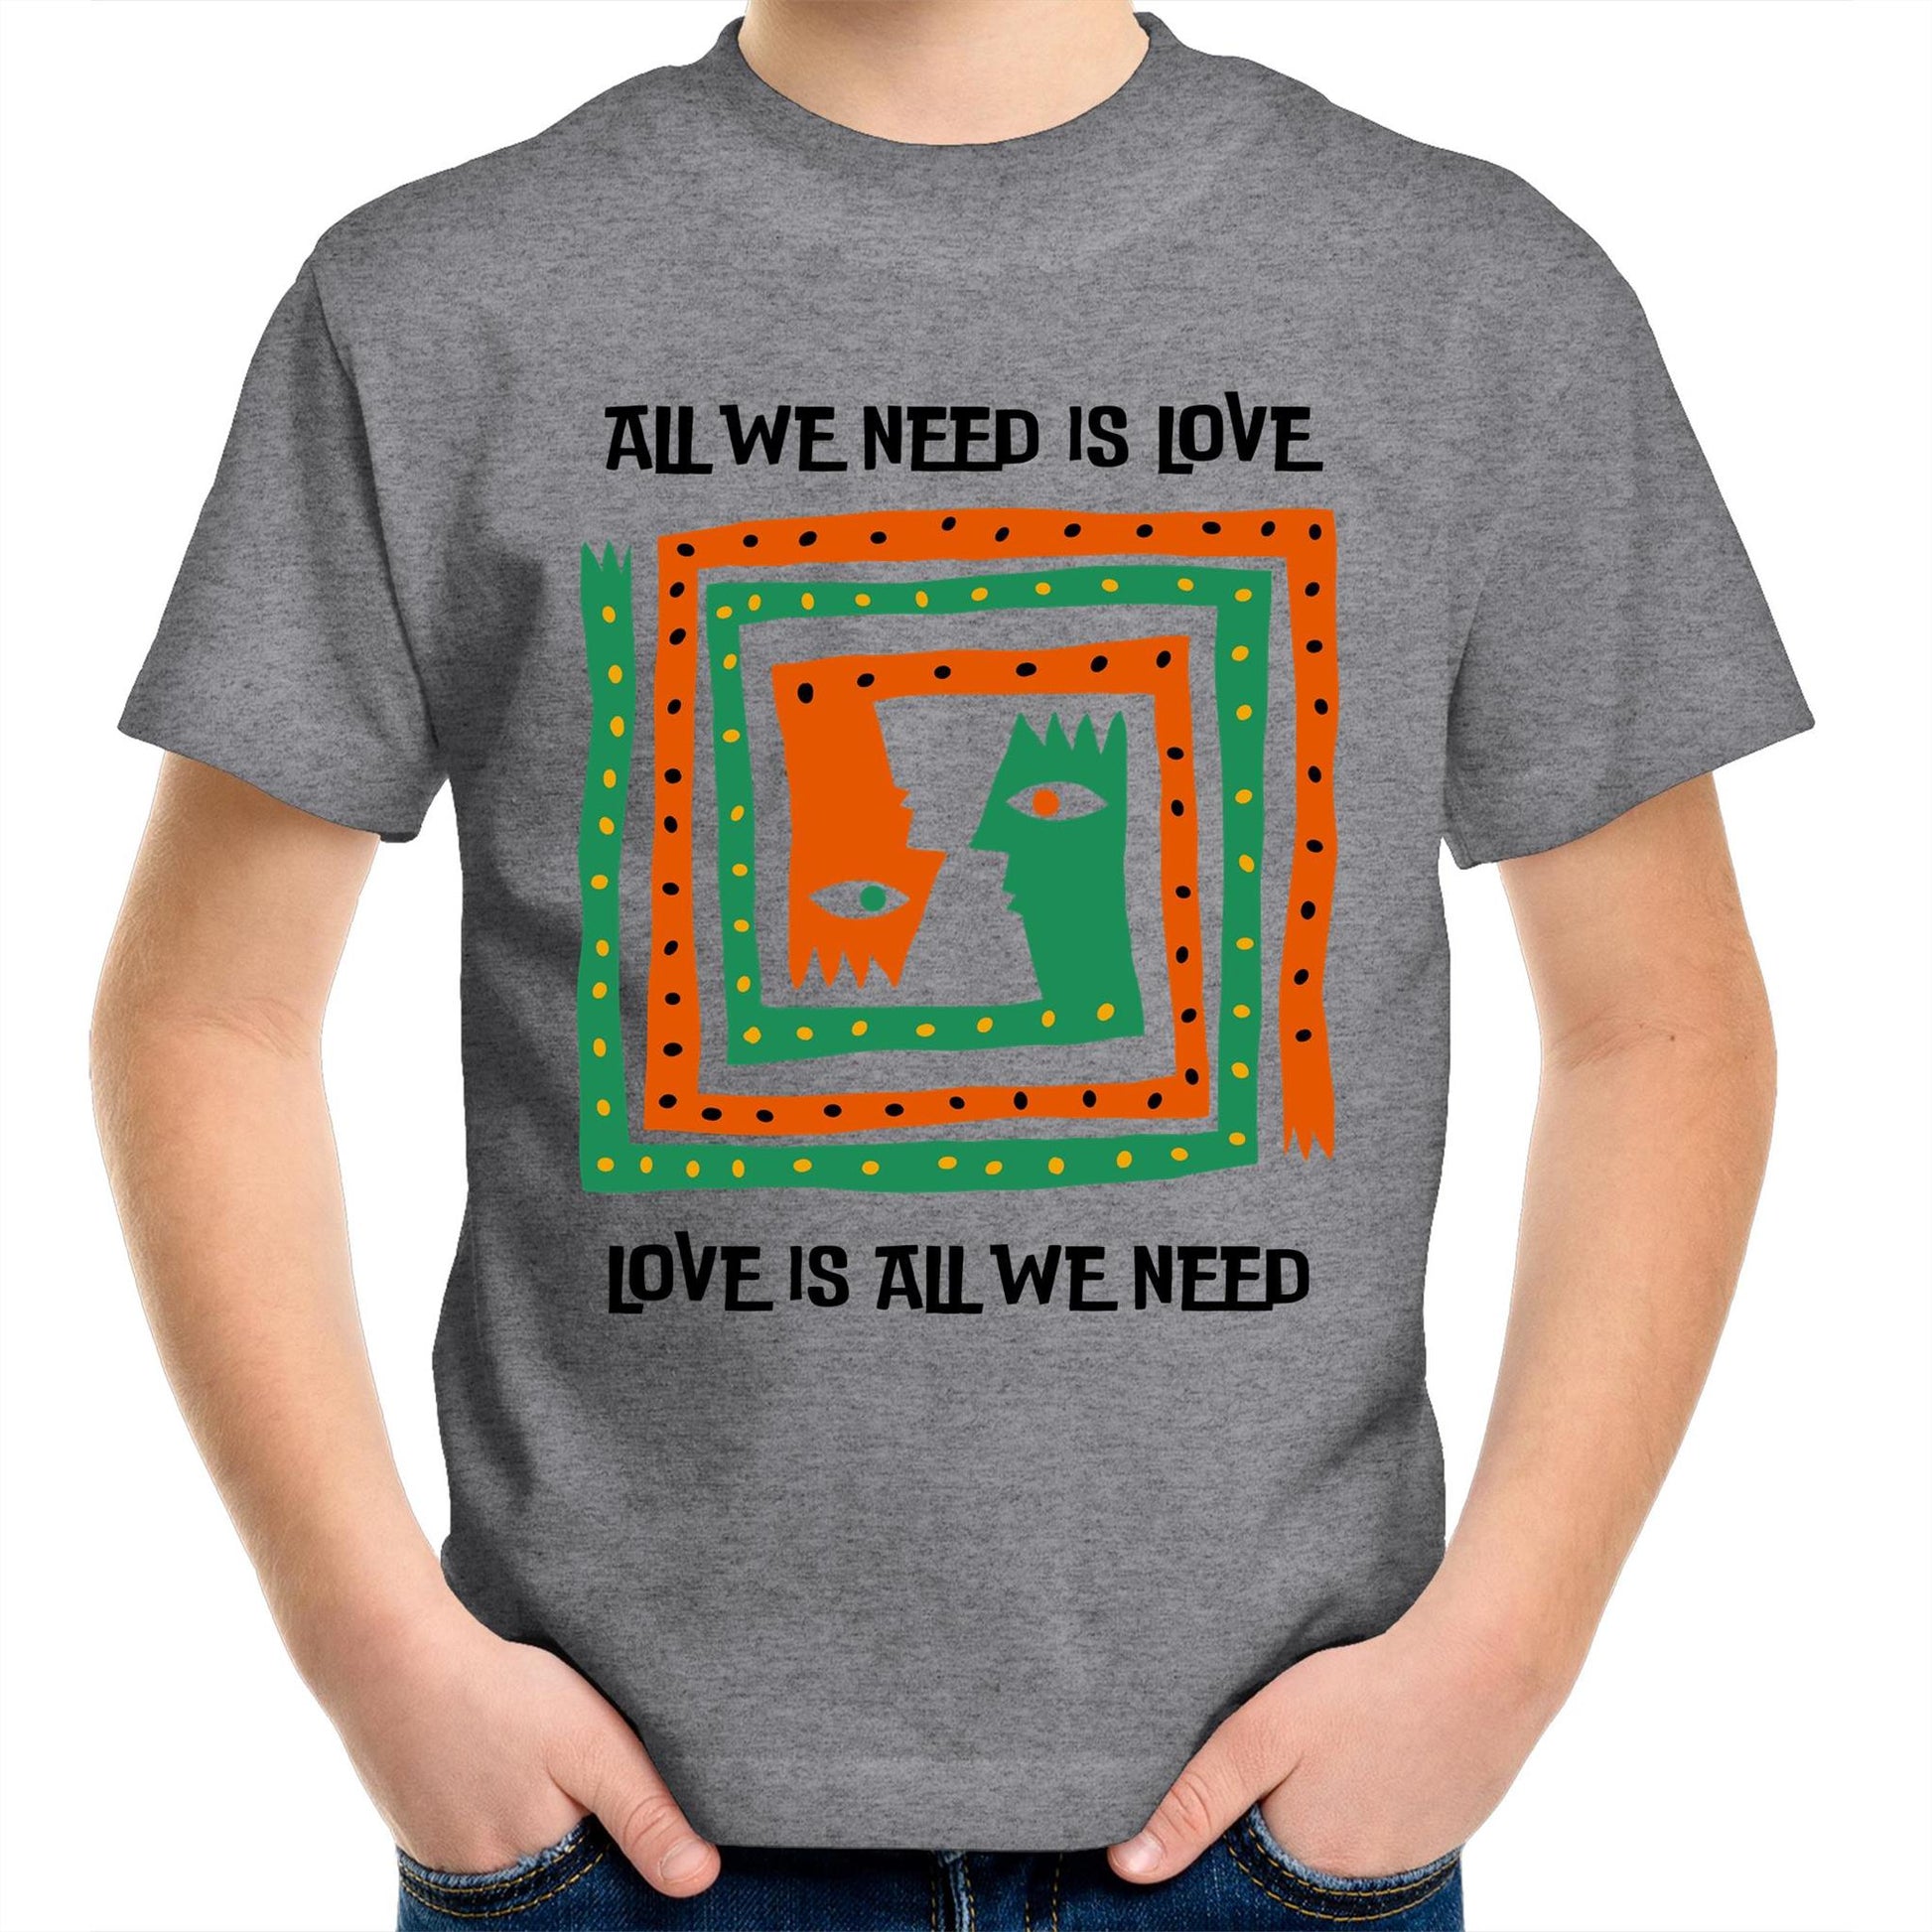 All We Need Is Love - Kids Youth T-Shirt Grey Marle Kids Youth T-shirt